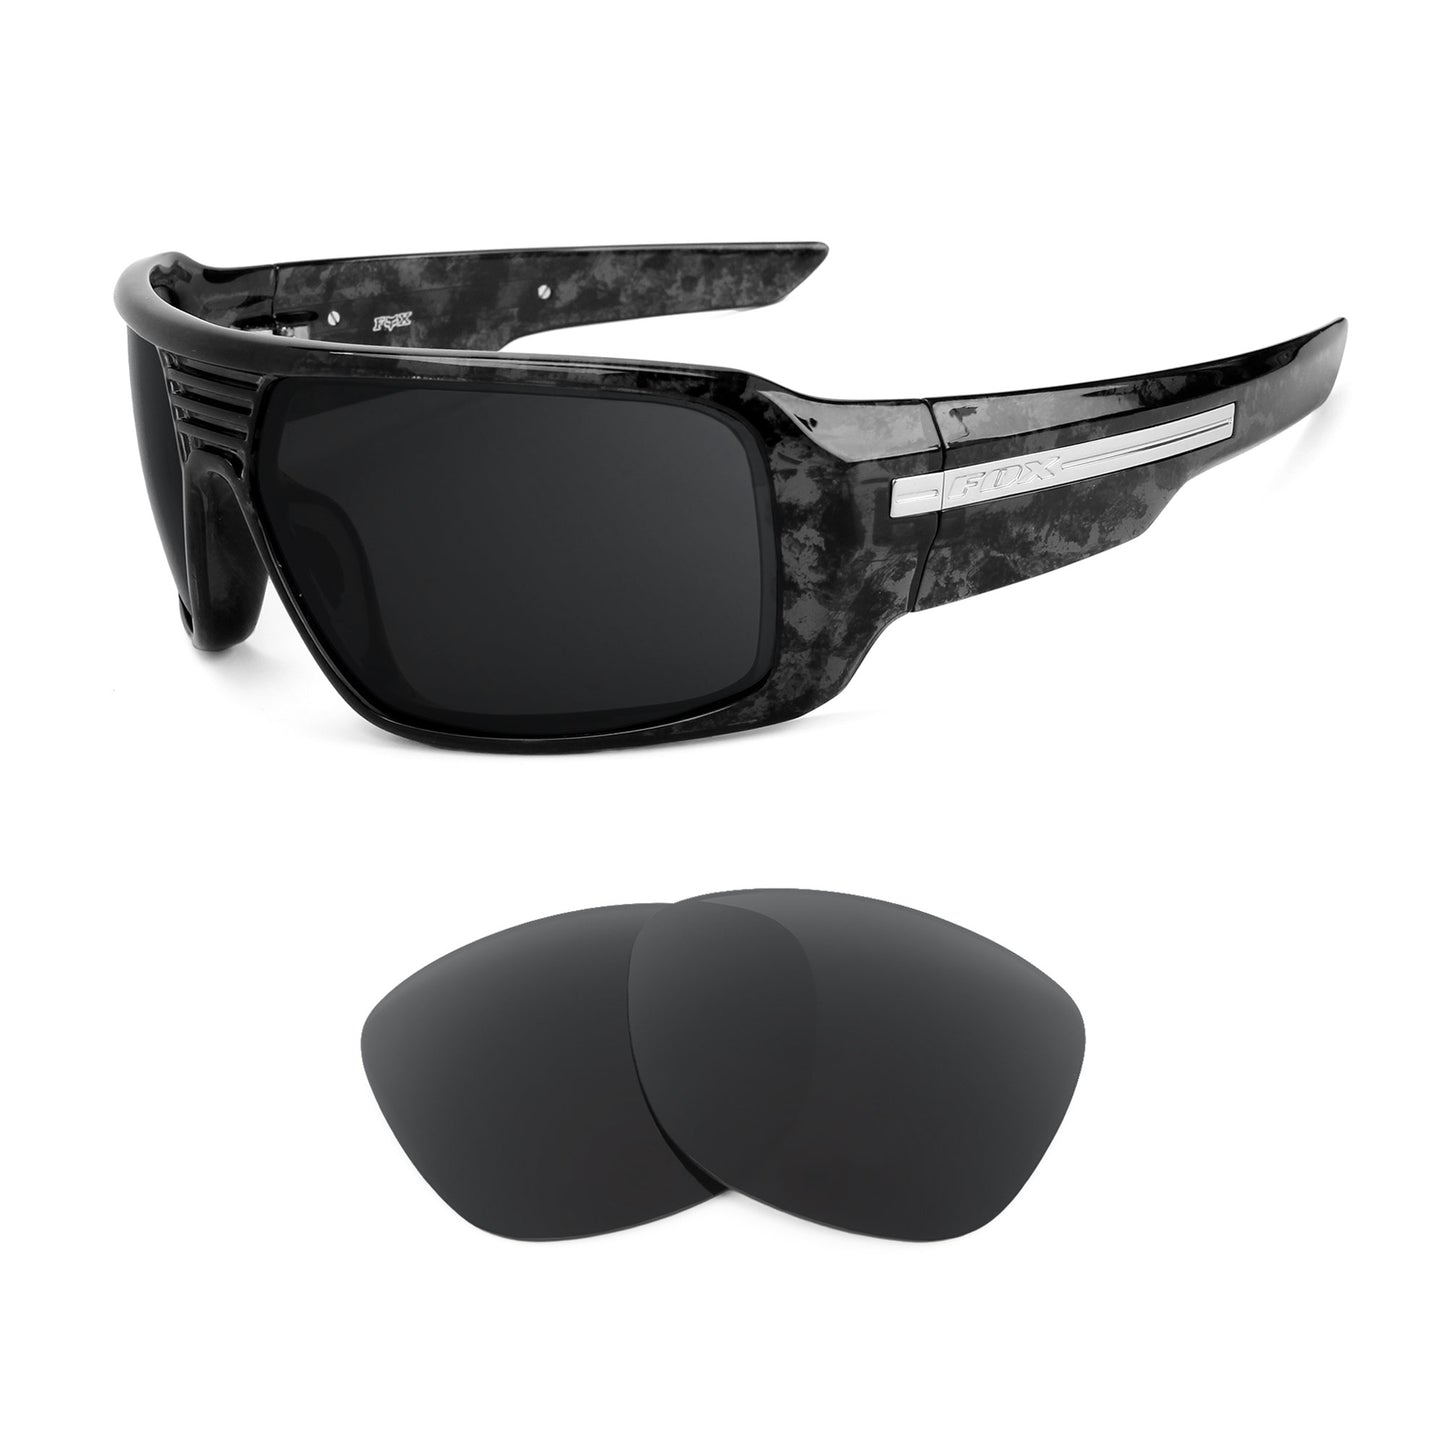 Fox Racing The Study sunglasses with replacement lenses